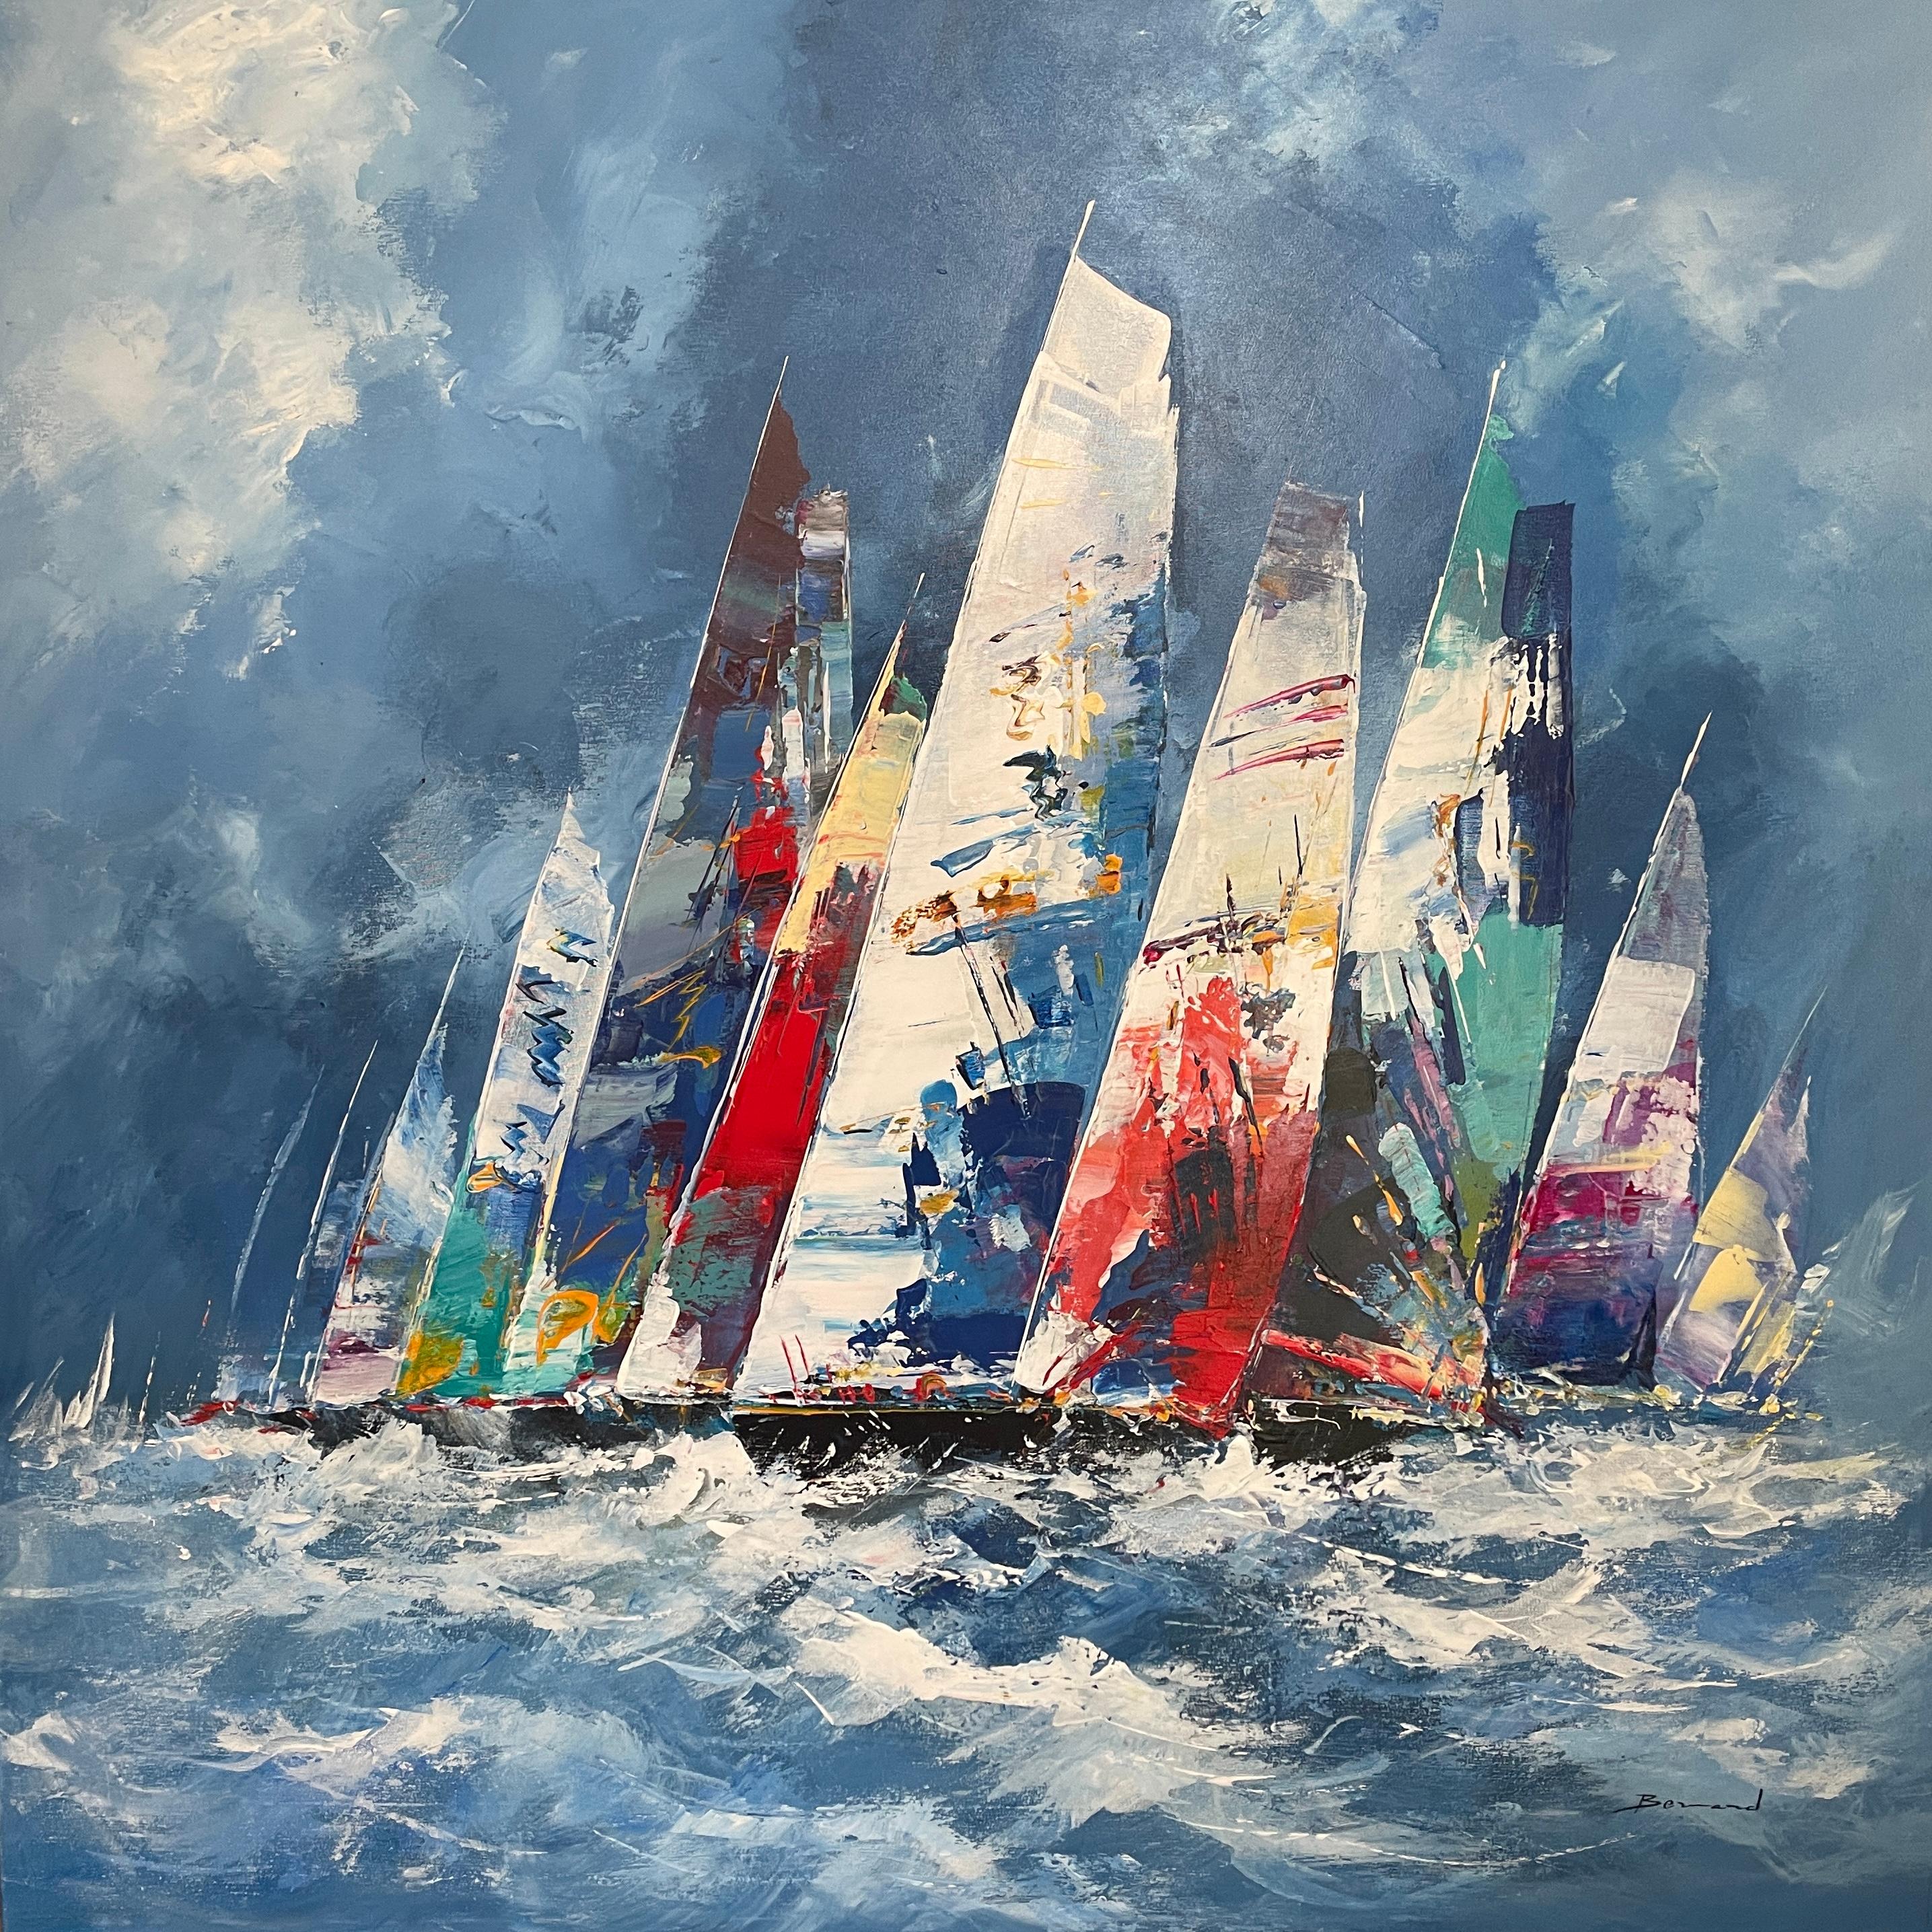 Bernard Abstract Painting - 'Ferocious Seas' Contemporary Abstract painting of sail boats on the sea, blue